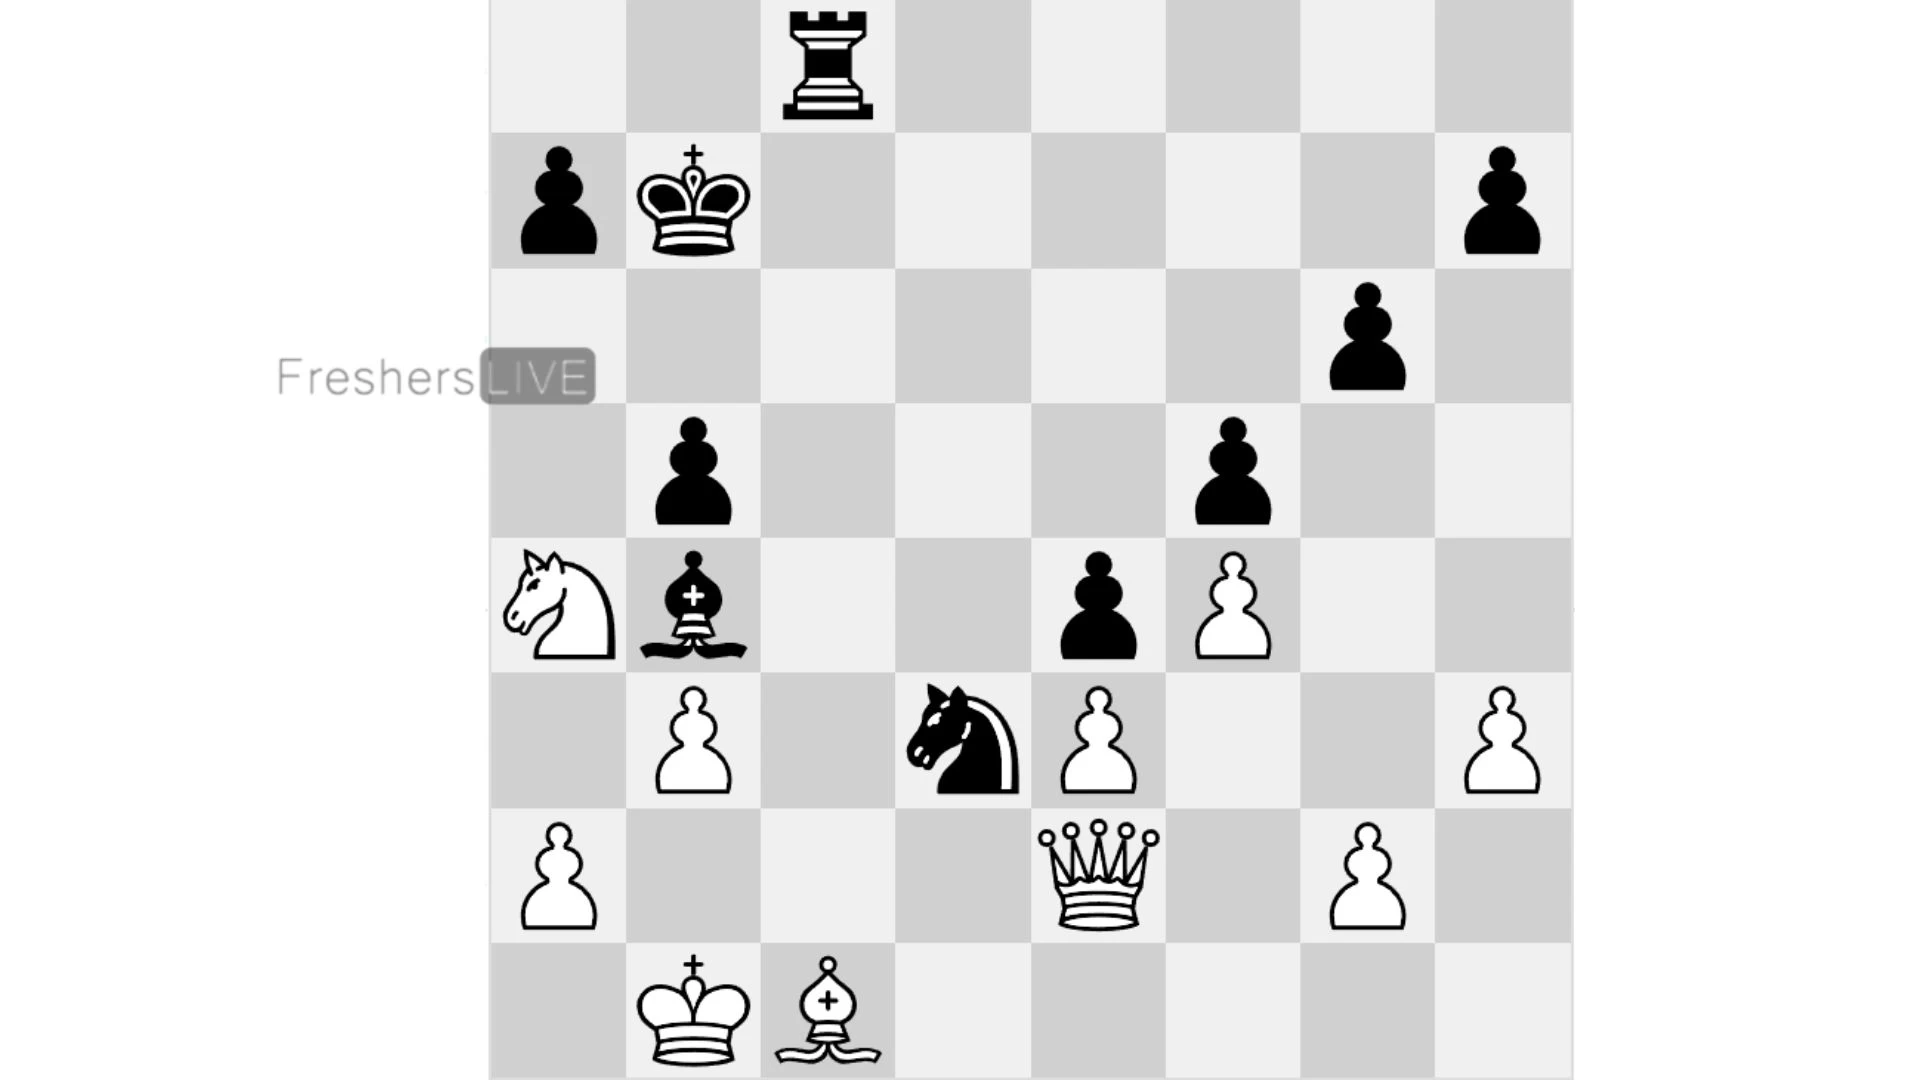 Can You Solve This Chess Puzzle With Just A Single Move?